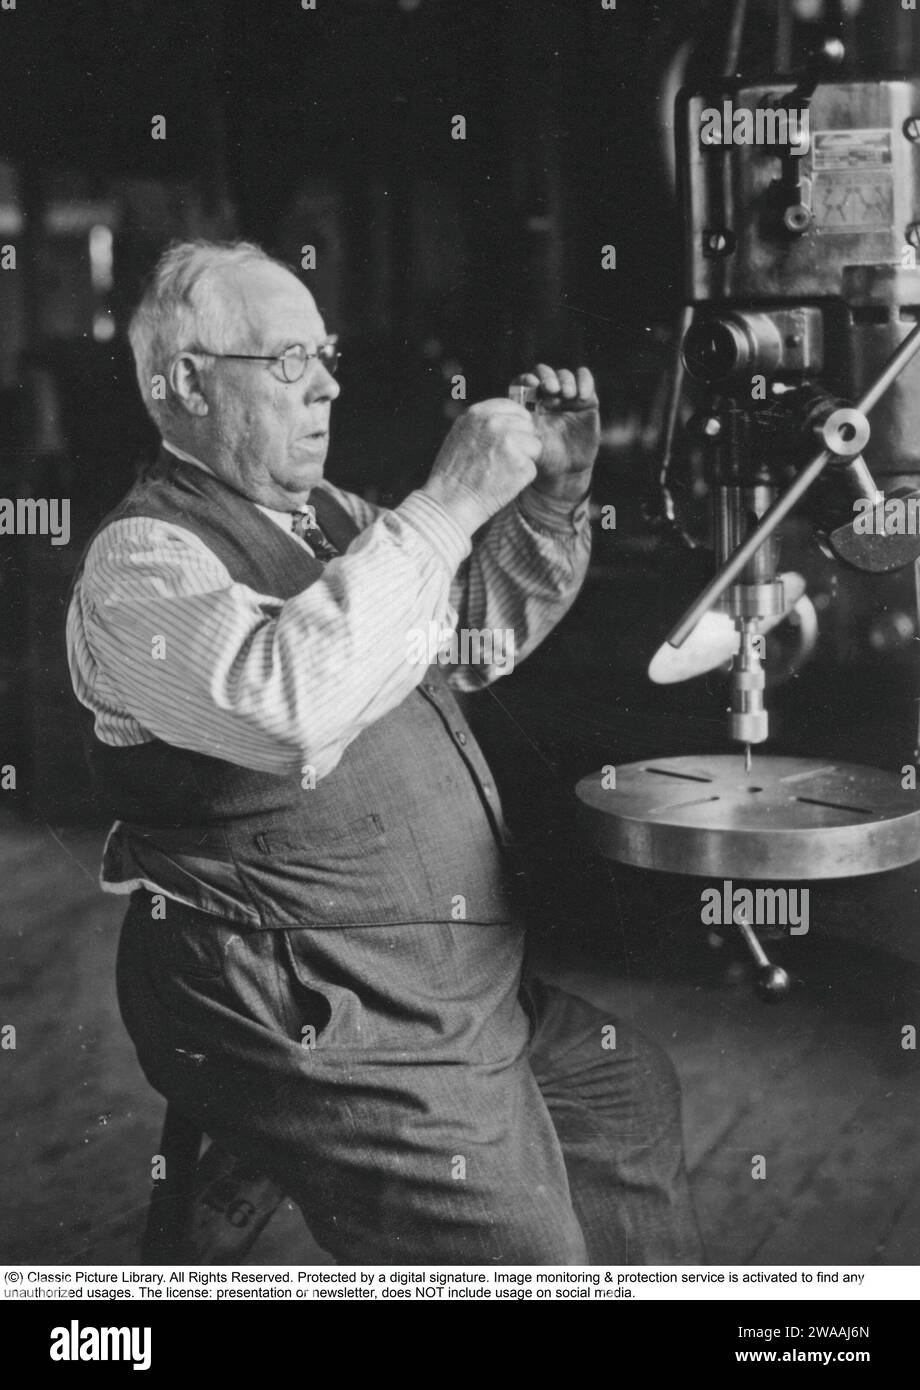 Johan Petter Johansson. Born december 12 1853, died august 25 1943. He was a swedish inventor and is the father of the modern adjustable spanner that he patended 1891 and 1892. He obtained over 100 patents in total. He also invented the plumber wrench that is seen in his hands. Over 100 million wrenches manufactured to date. Stock Photo